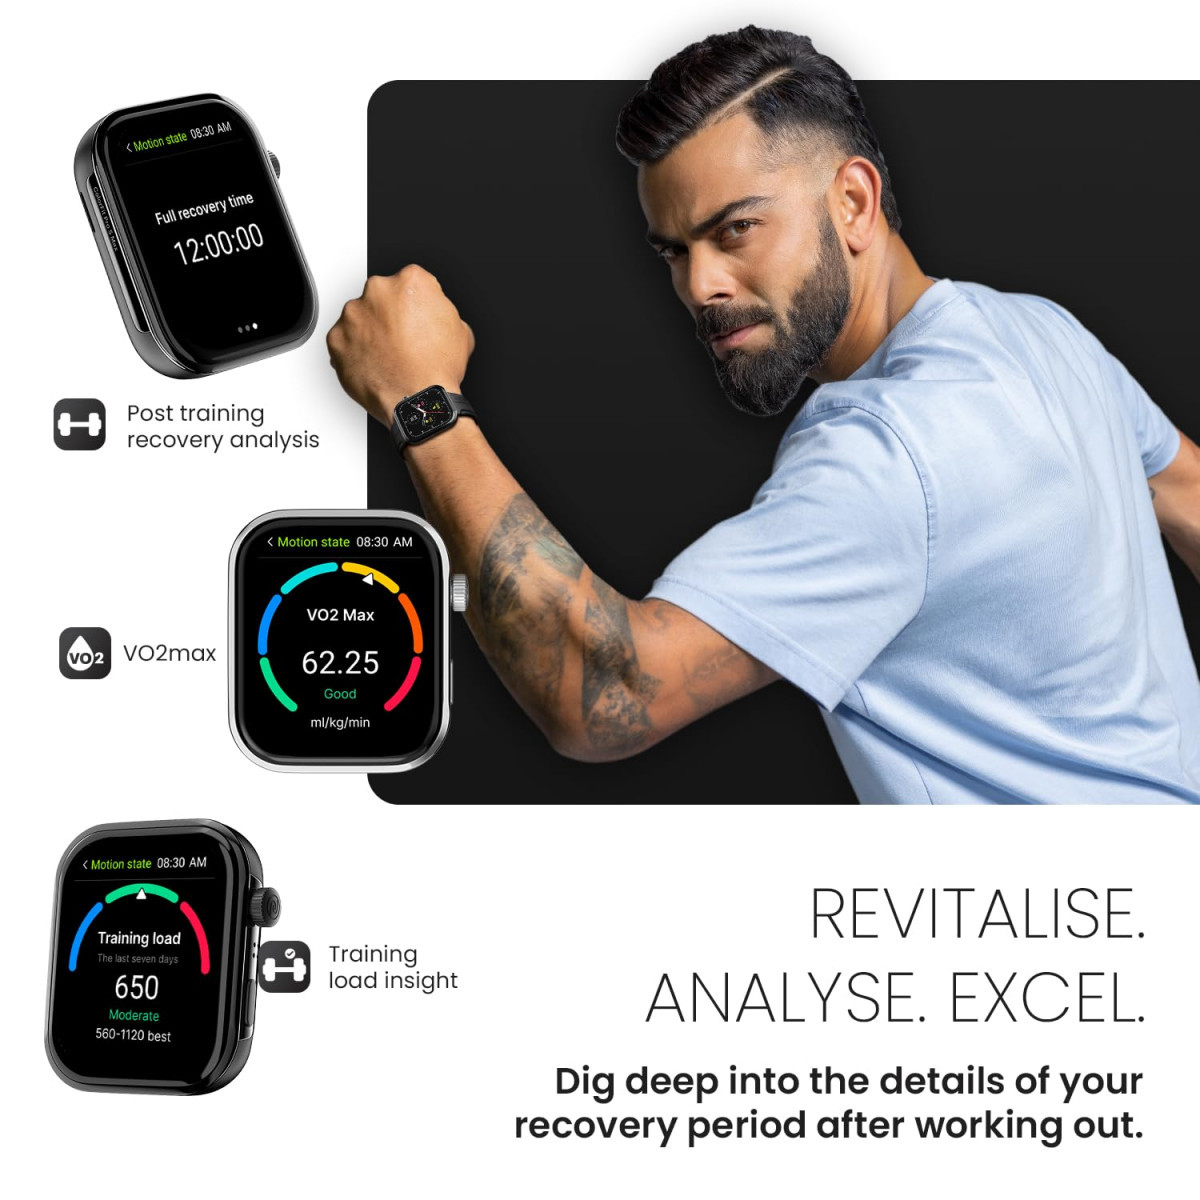 Noise Newly Launched ColorFit Pro 5 Max 196 AMOLED Display Smart Watch BT Calling Post Training Workout Analysis VO2 Max Rapid Health 5X Faster Data Transfer - Jet Black